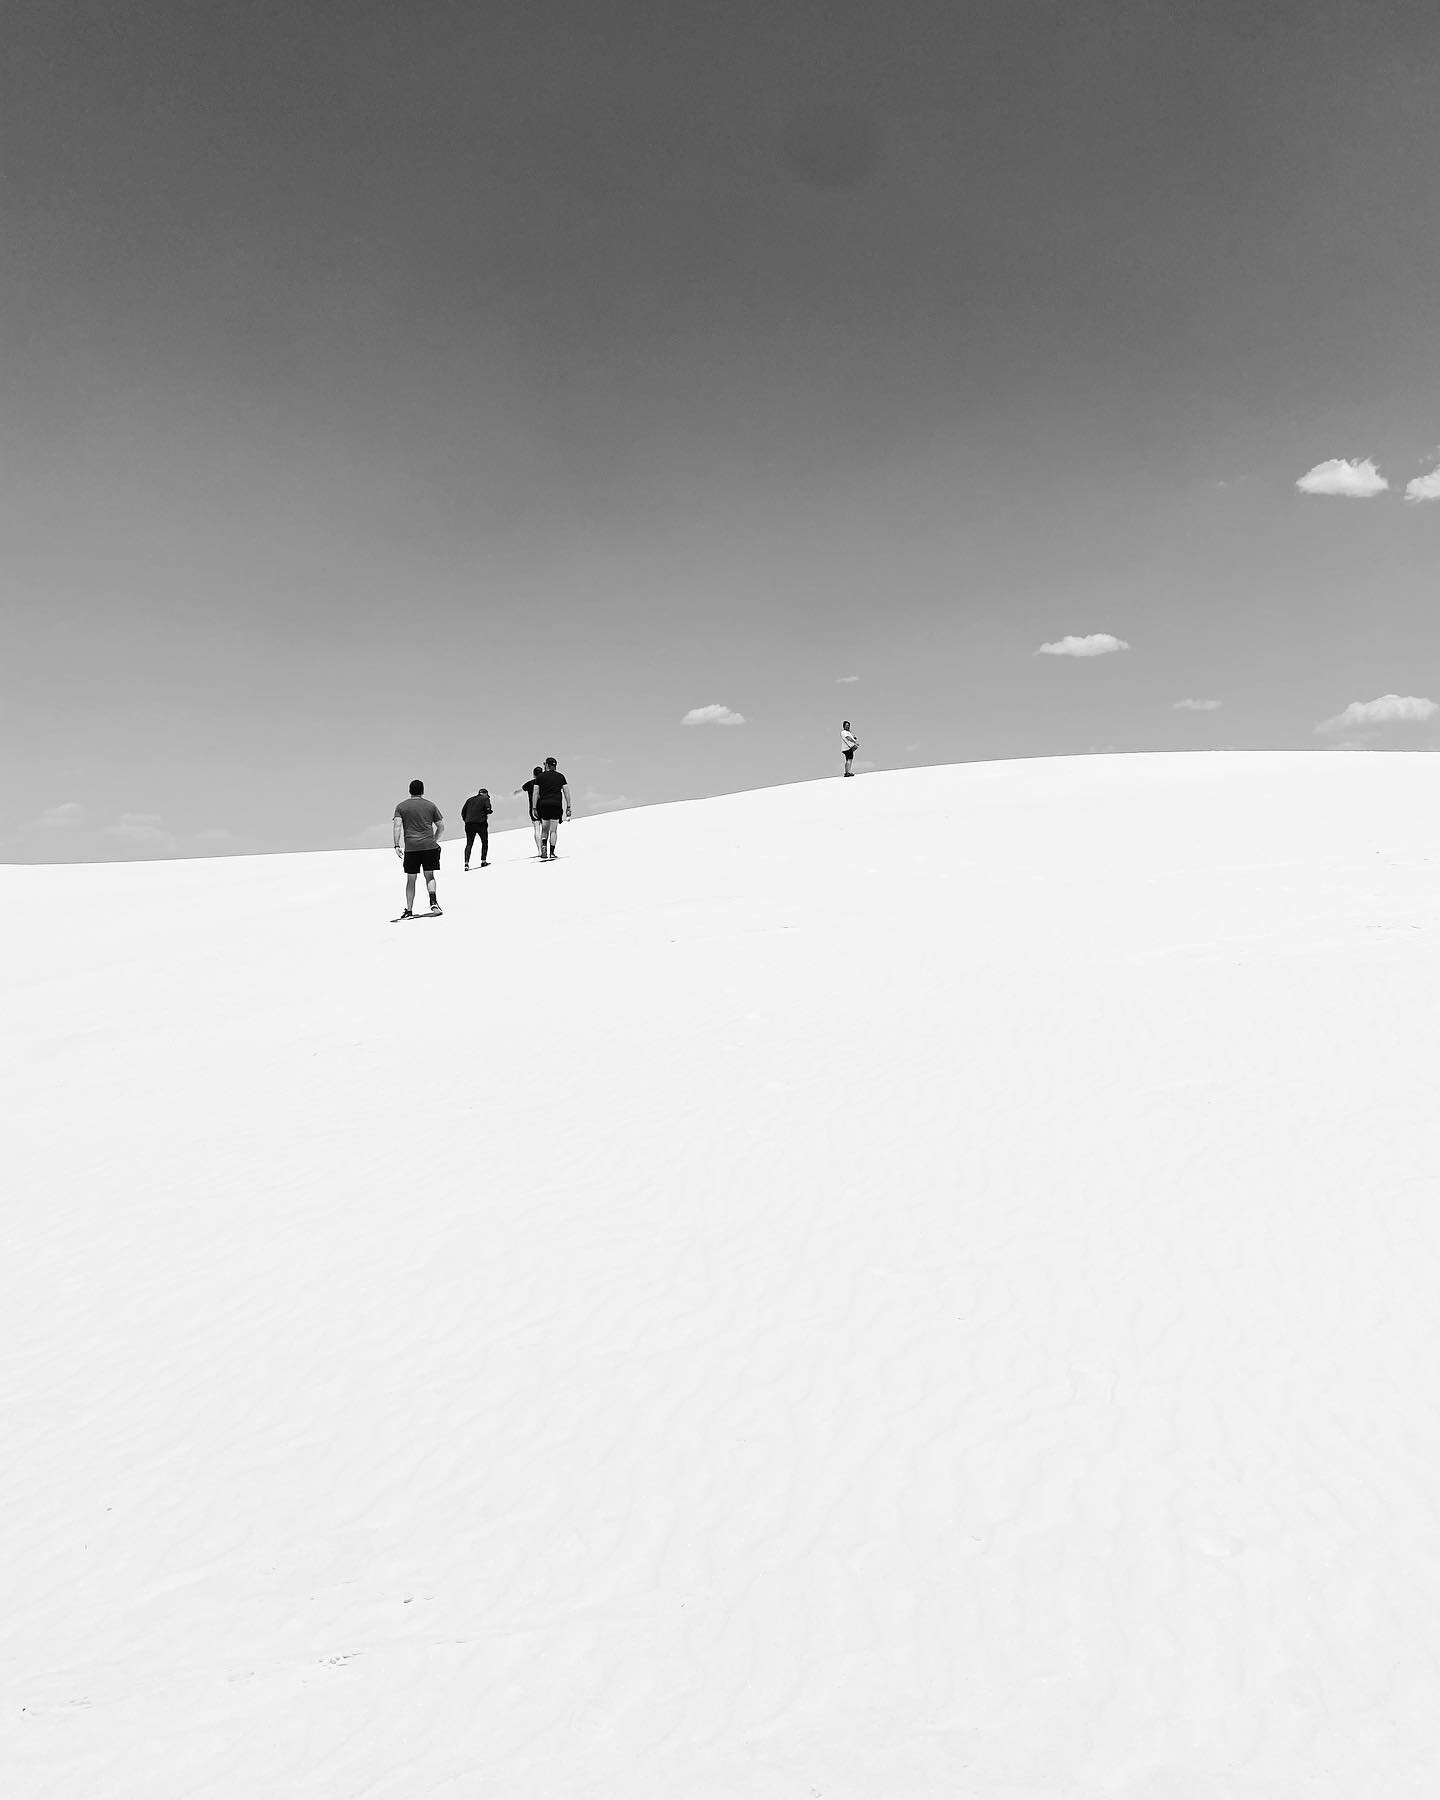 Needed to post a solo shot of the White Sands National Park

#whitesandsnationalpark 
#bachelorparty
#photography
#blackandwhitephotography
#blackandwhite
#nationalparkgeek
#nationalpark